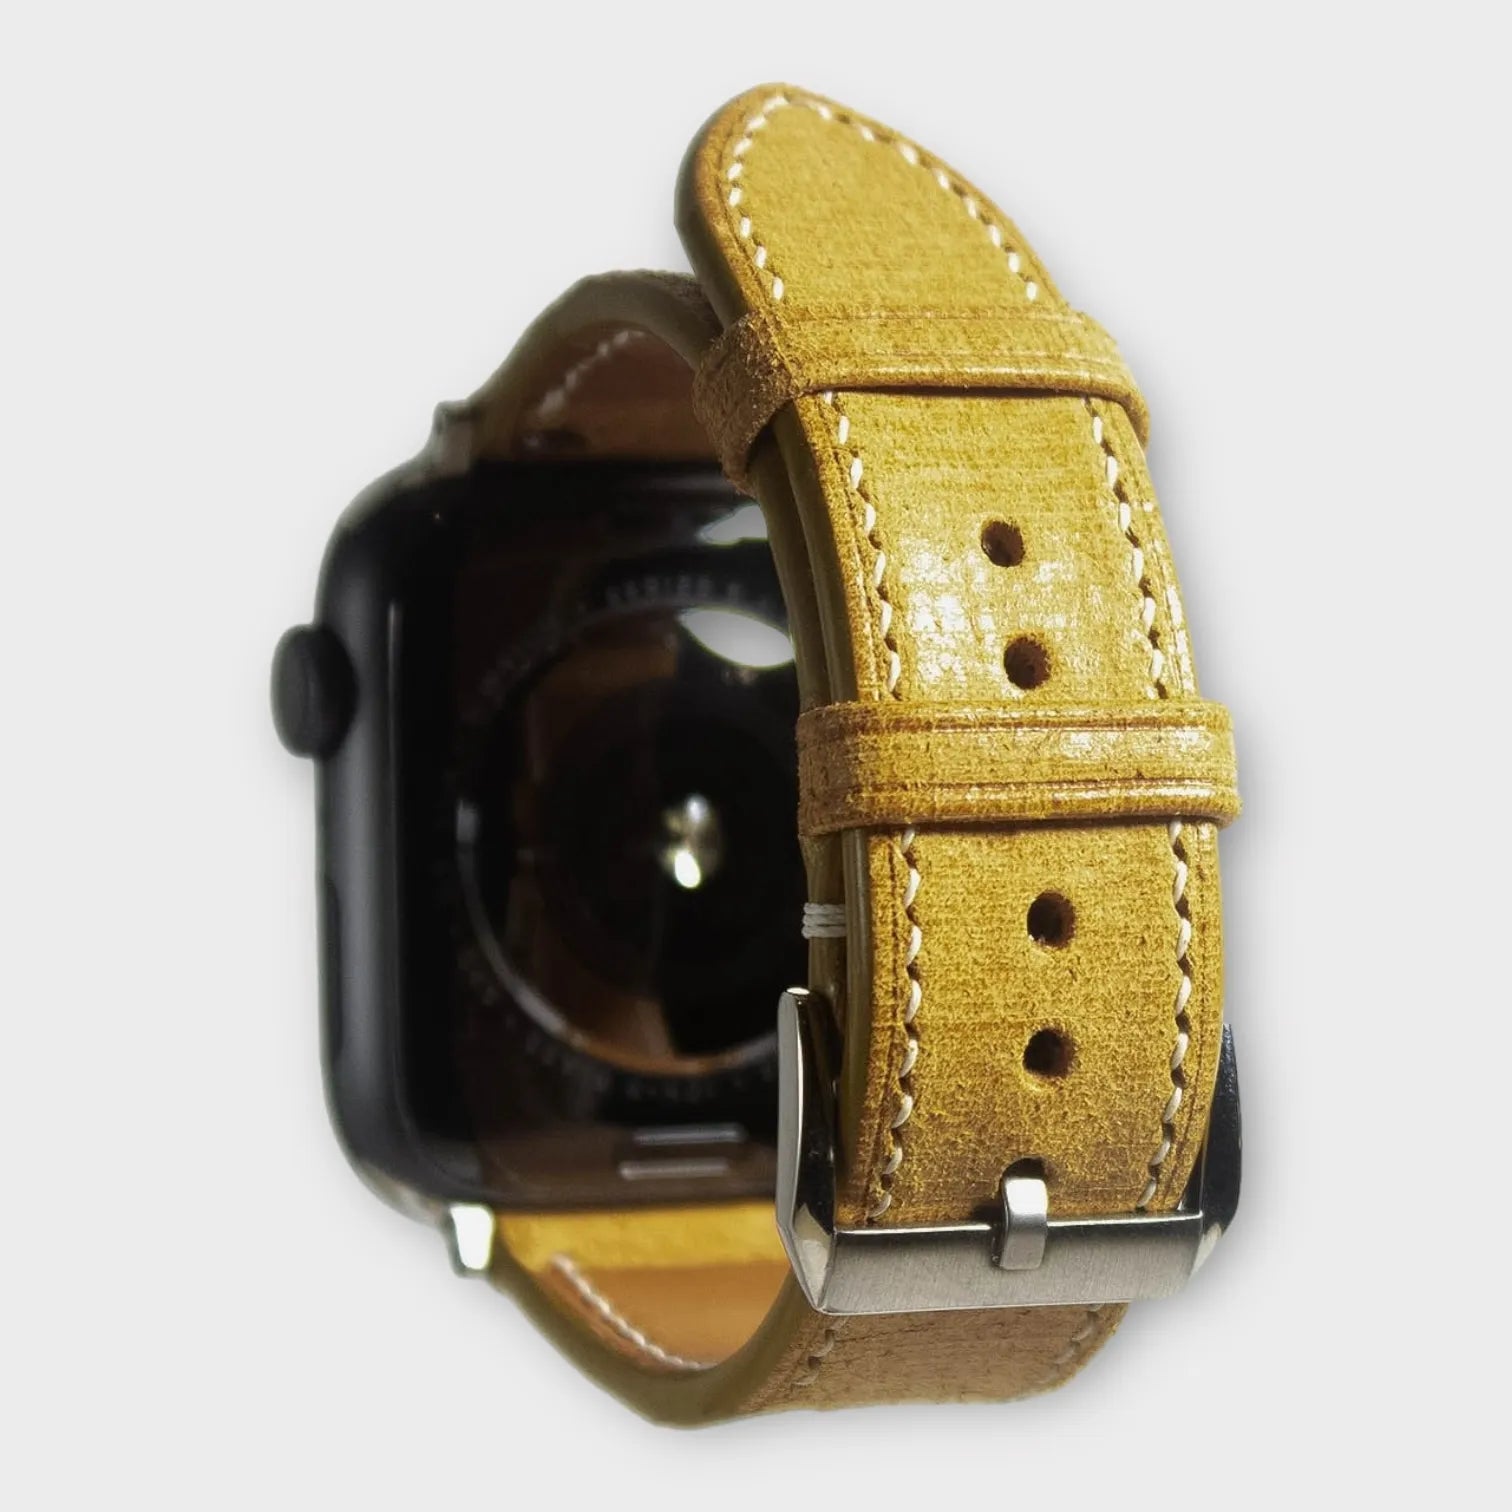 Apple watch bands in elegant yellow Babele leather, perfect for adding a pop of color to your wardrobe.